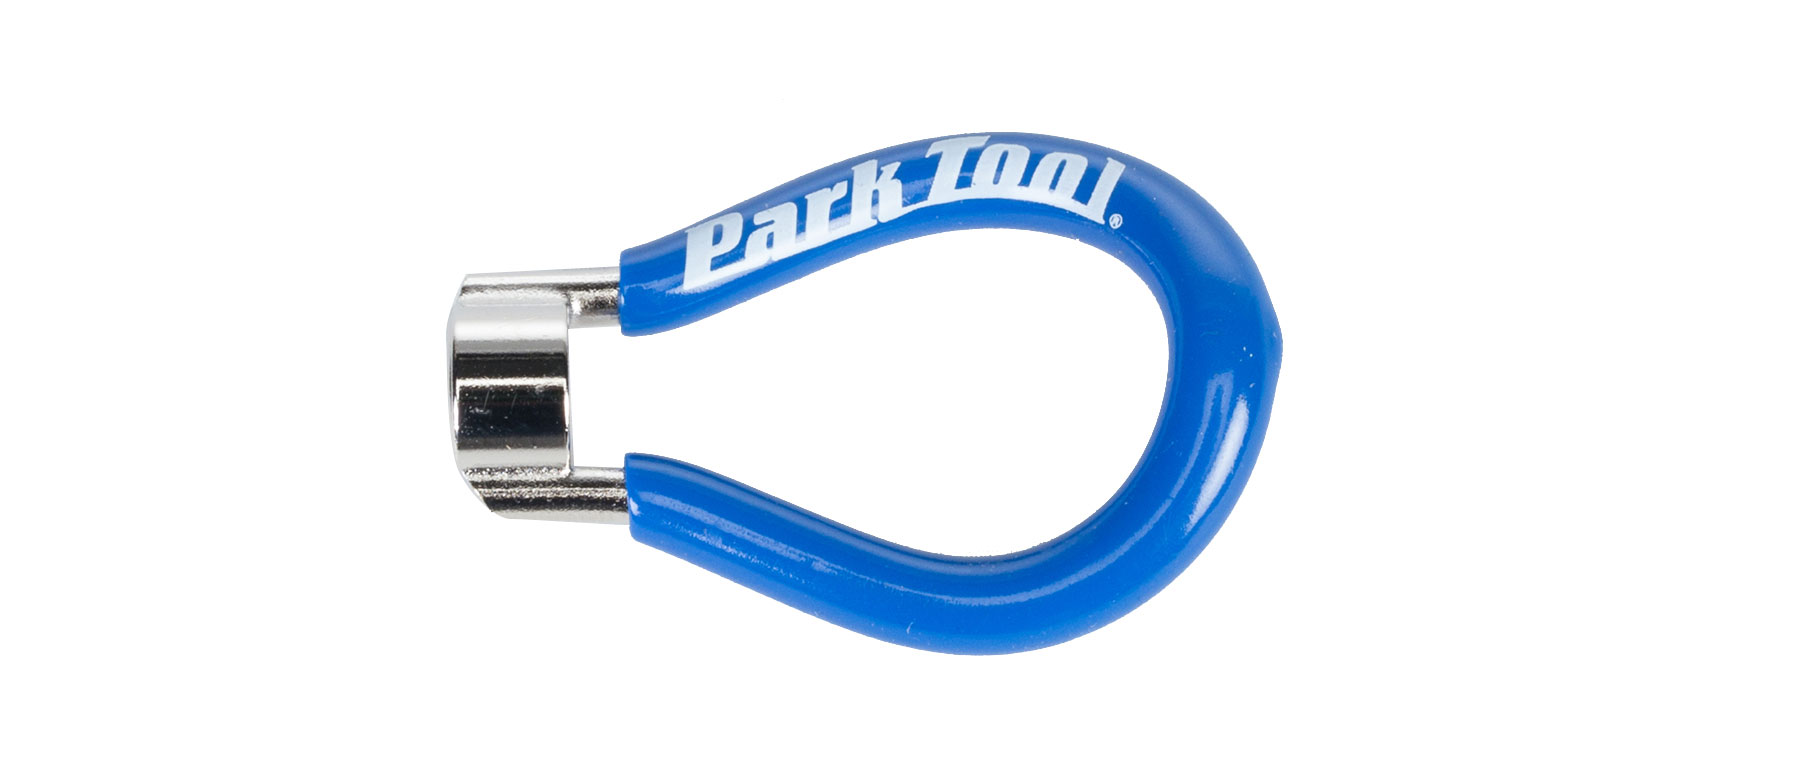 PARK TOOL SW-3 BLUE BICYCLE 3.96MM SPOKE NIPPLE WRENCH BICYCLE TOOL 